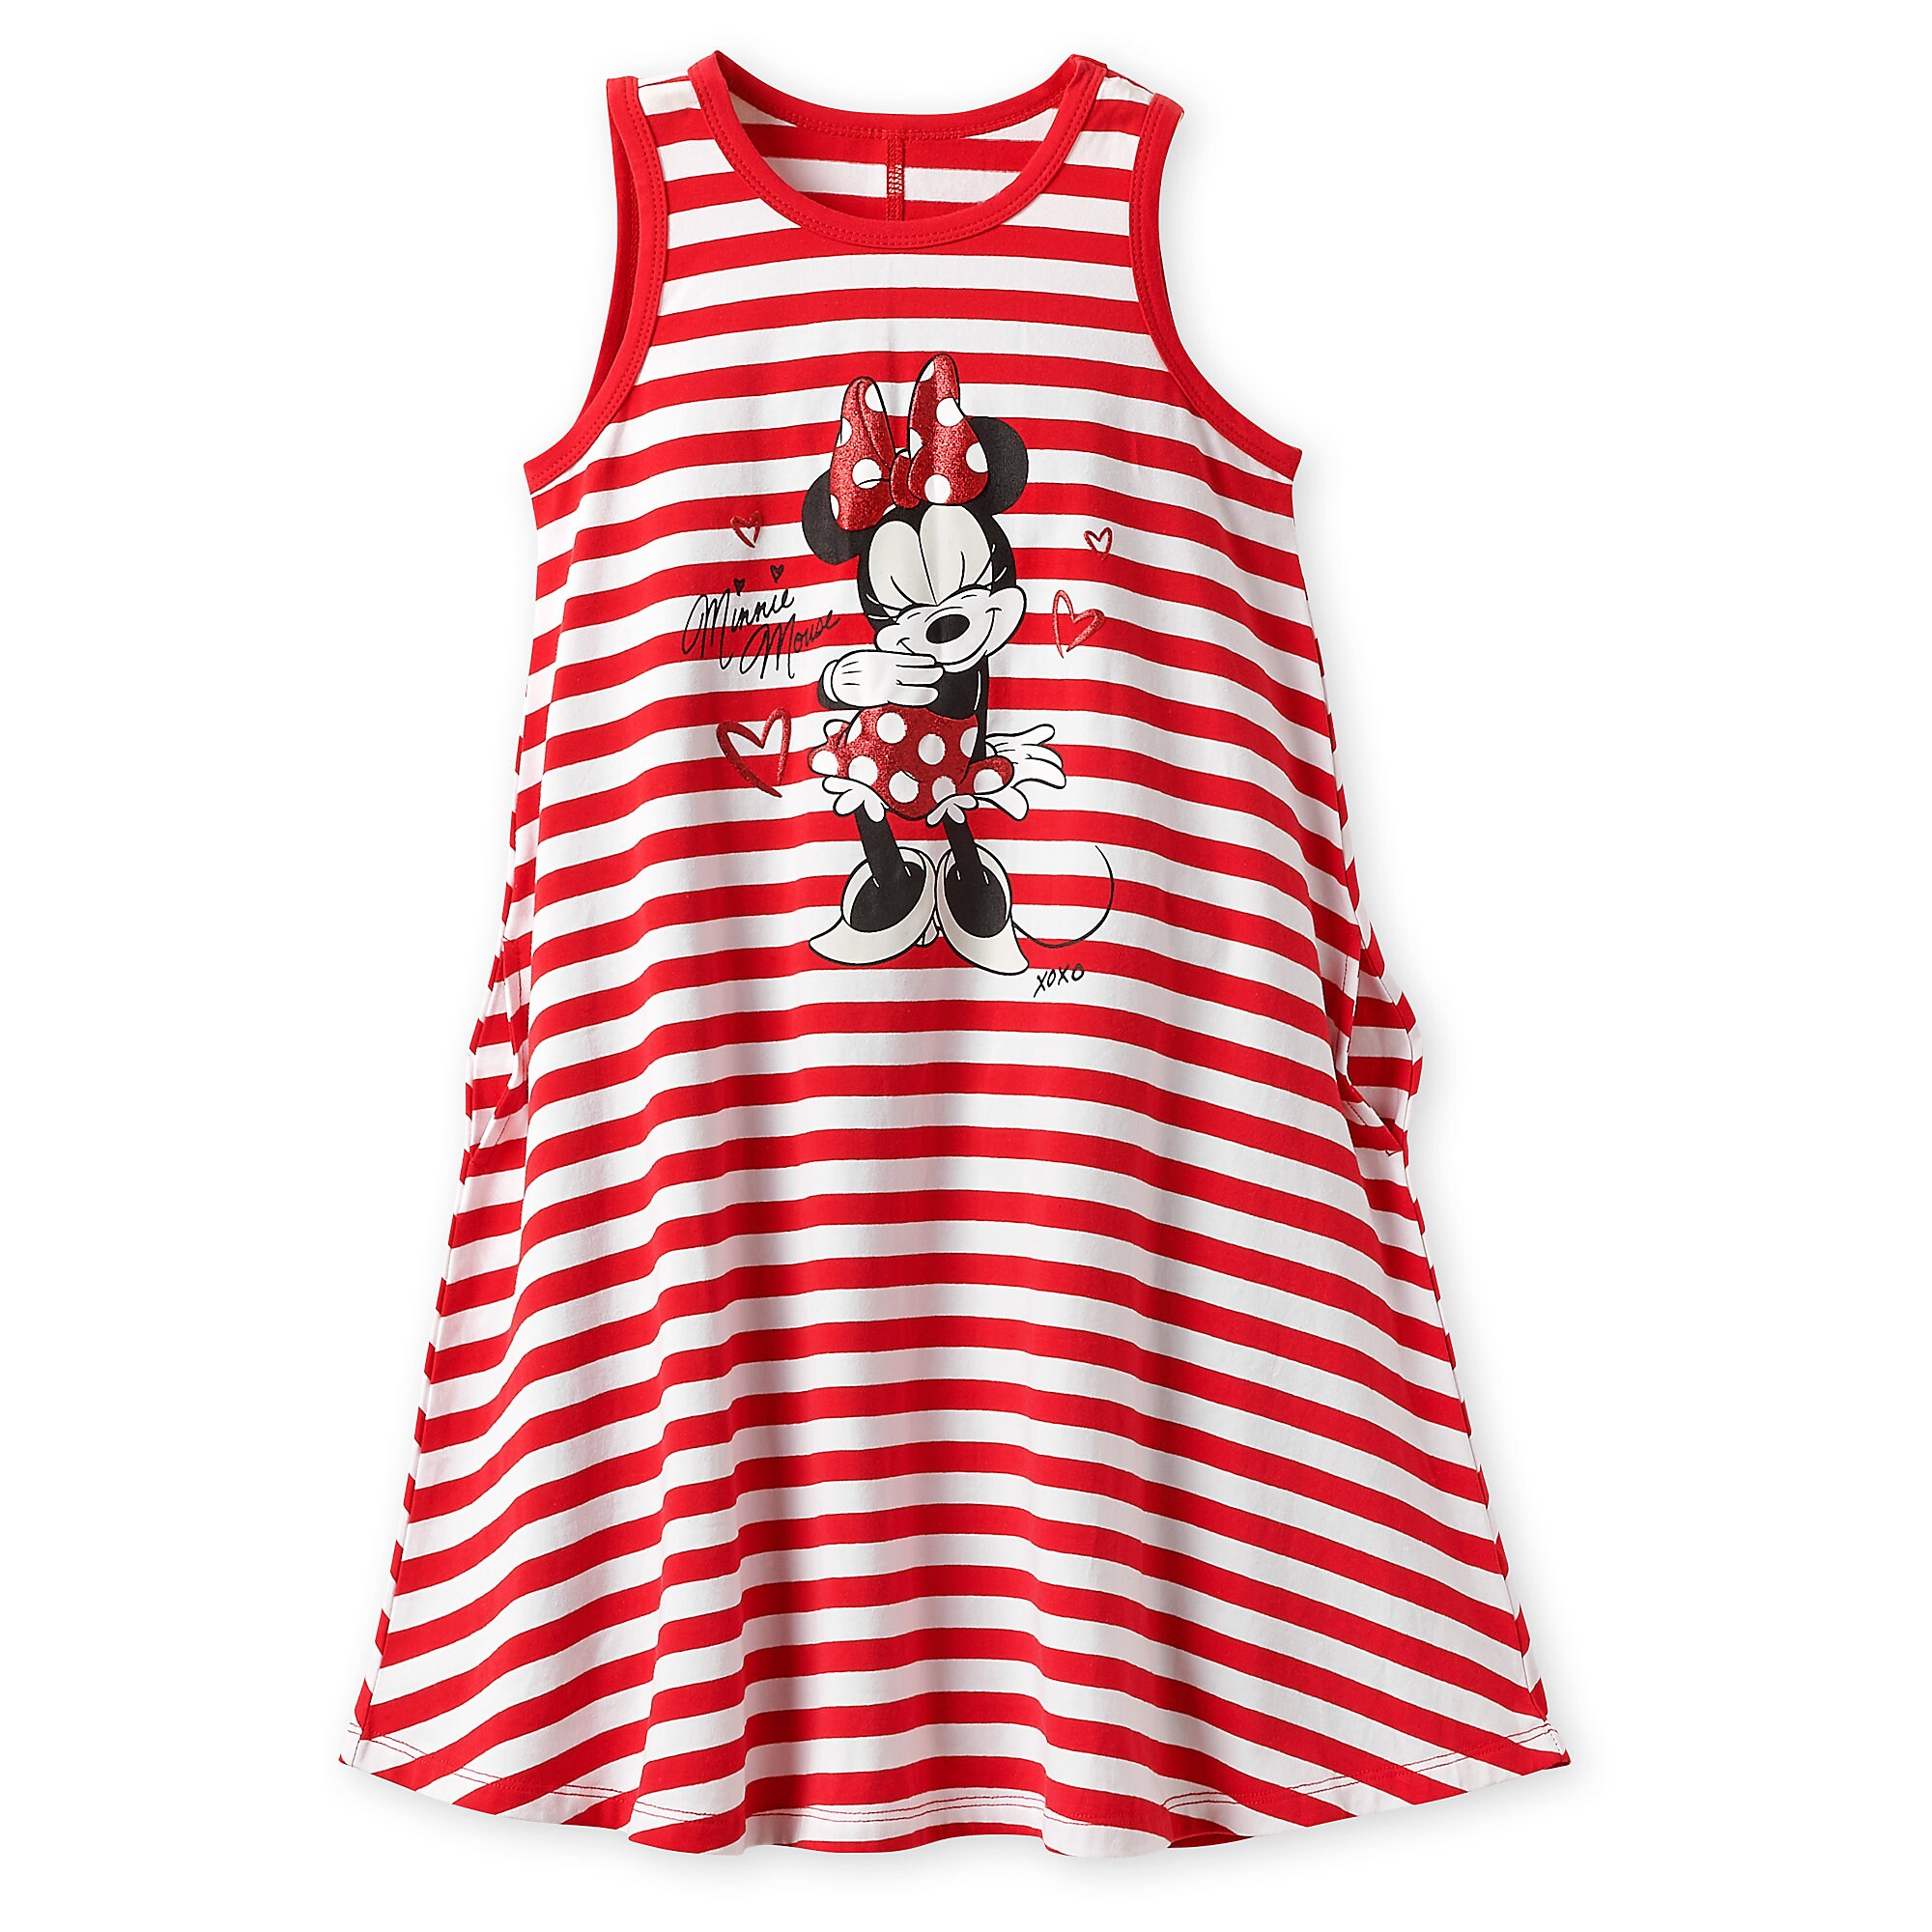 Minnie Mouse Striped Dress for Girls - Red